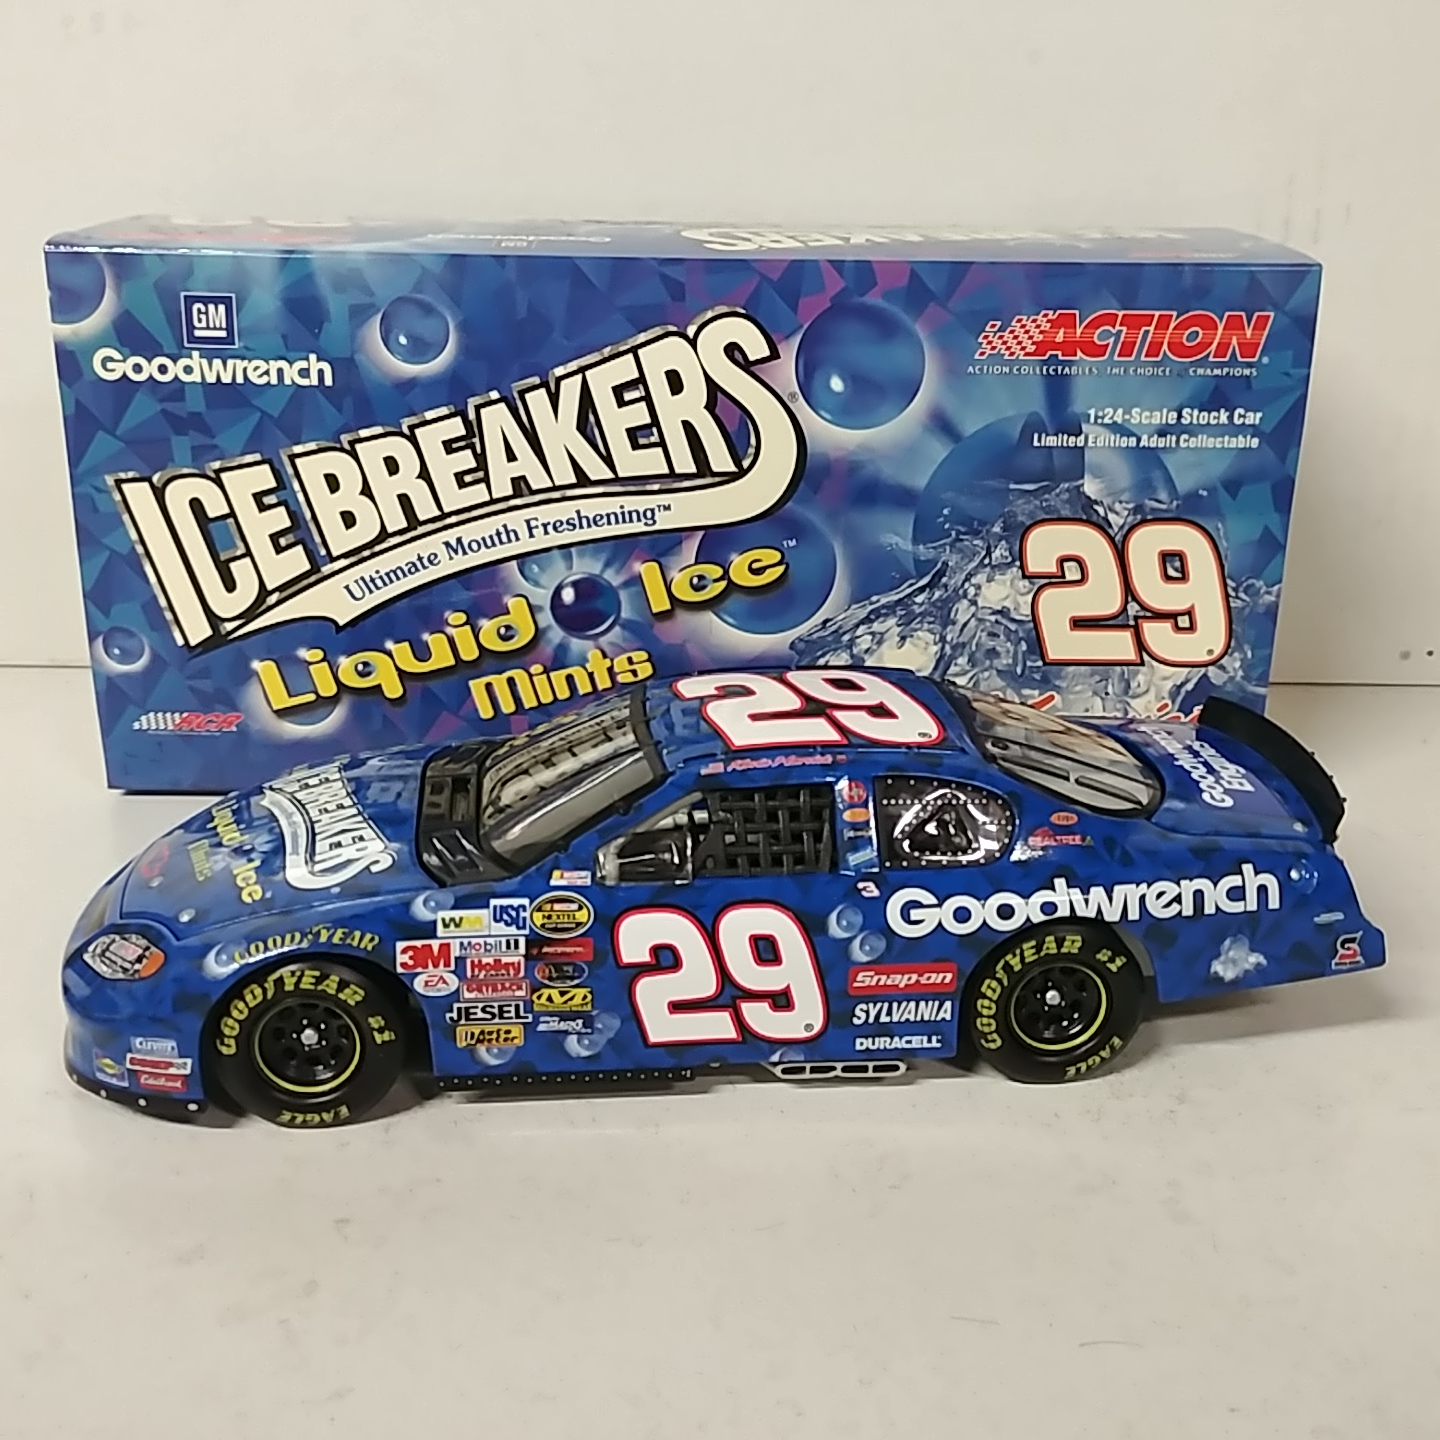 2004 Kevin Harvick 1/24thGM Goodwrench "Ice Breakers Liquid Ice" c/w car